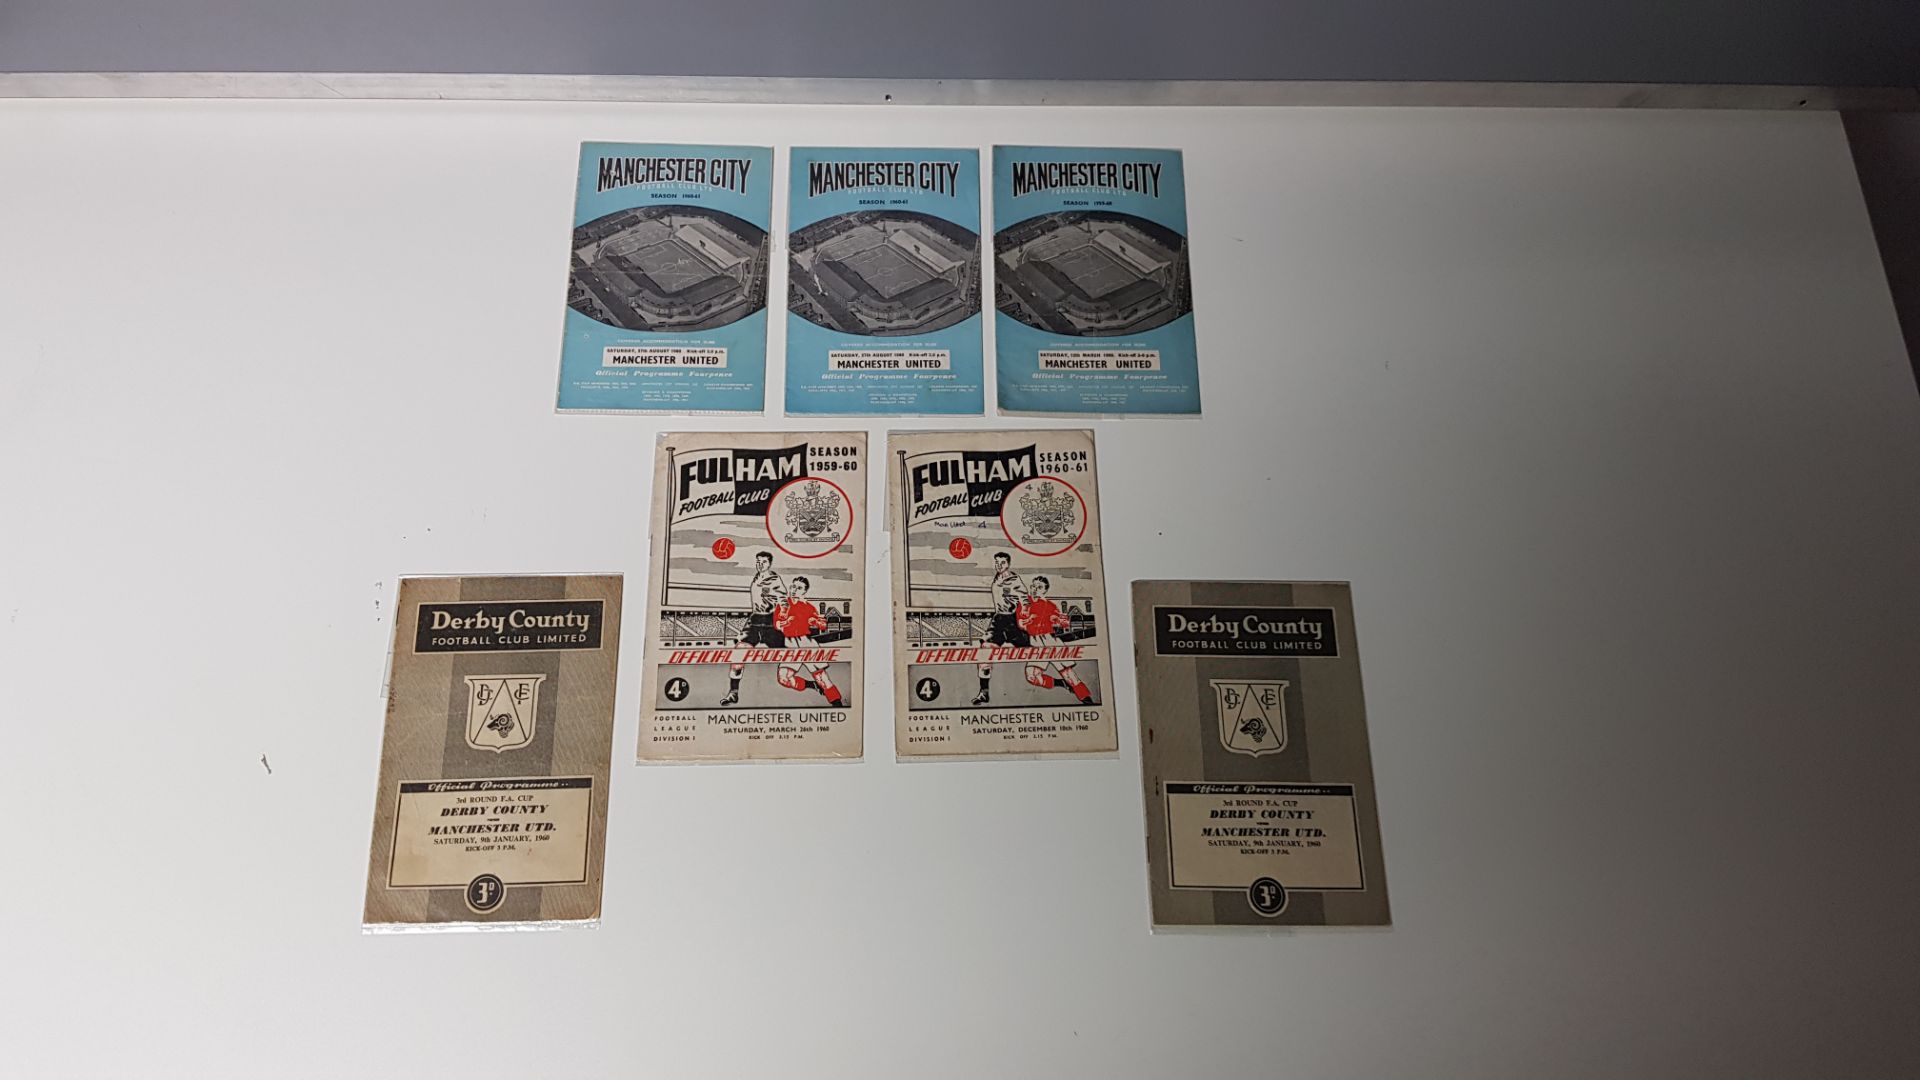 7 X MANCHESTER UNITED AWAY PROGRAMMES FROM THE 1960 SEASON TO INCLUDE - 2 X DERBY COUNTY, 3 X - Image 2 of 2